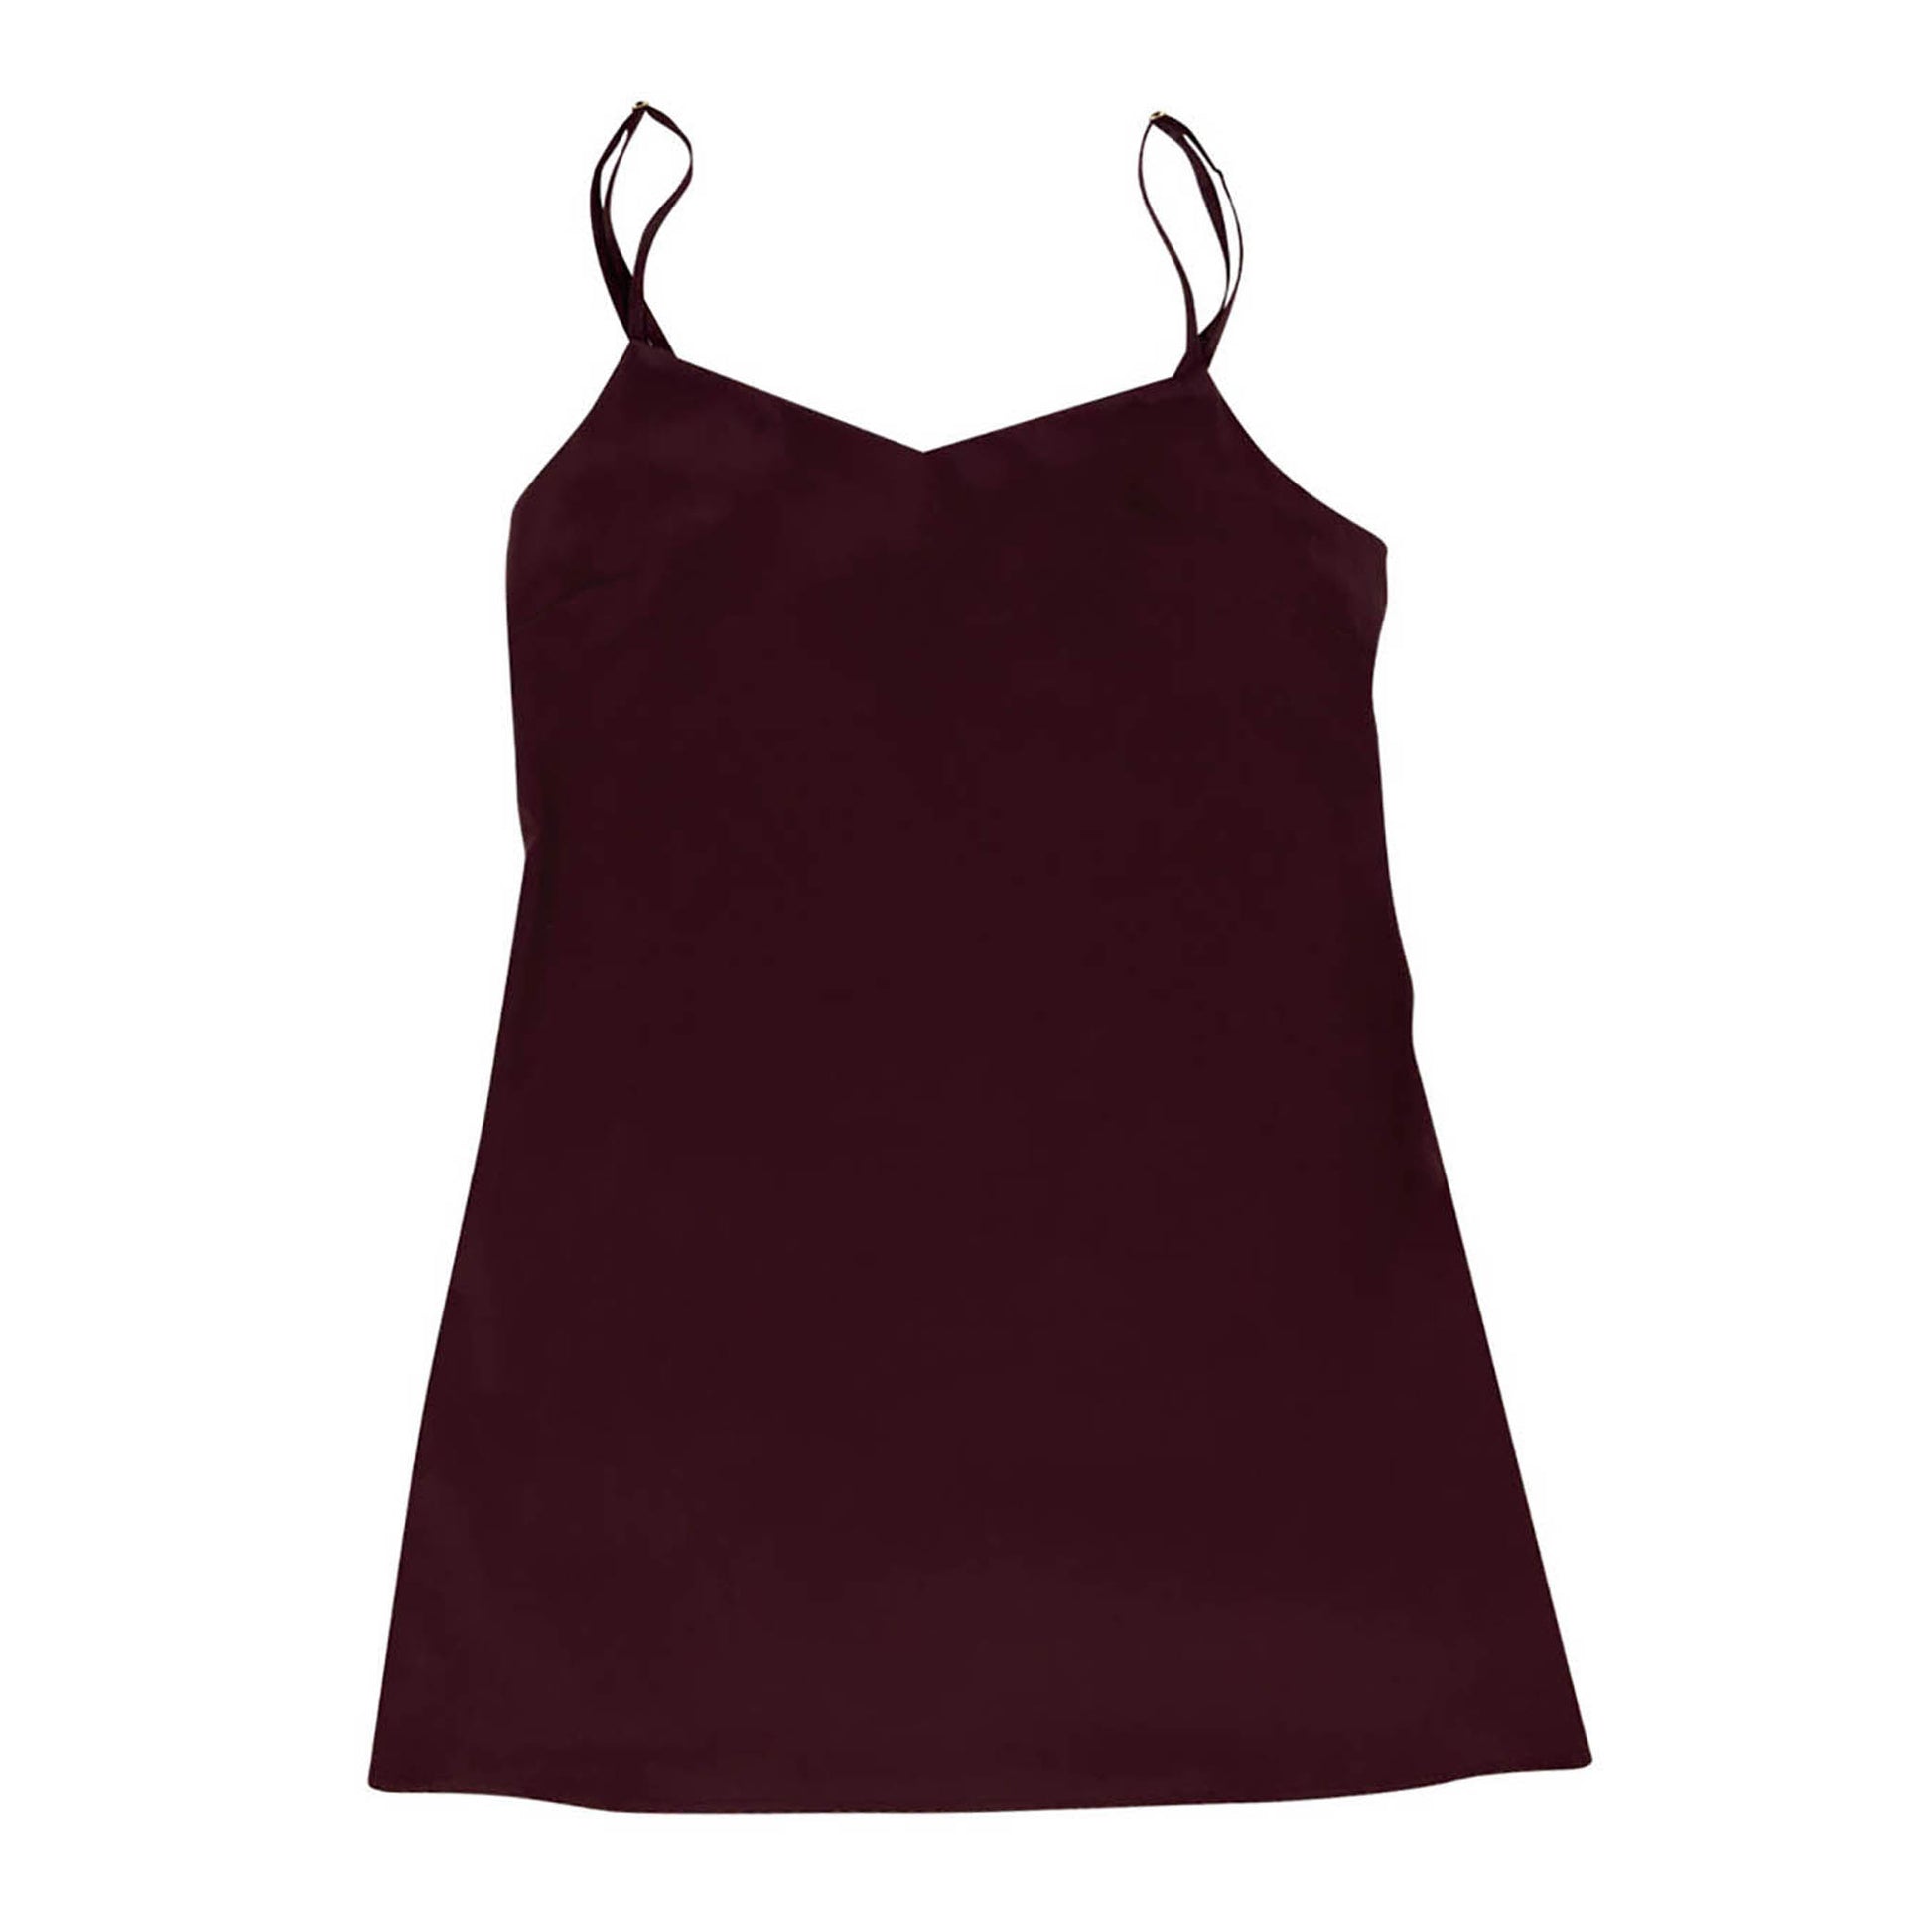 The Lady Mulberry silk chemise is the perfect underpinning for creating a sensual silhouette.